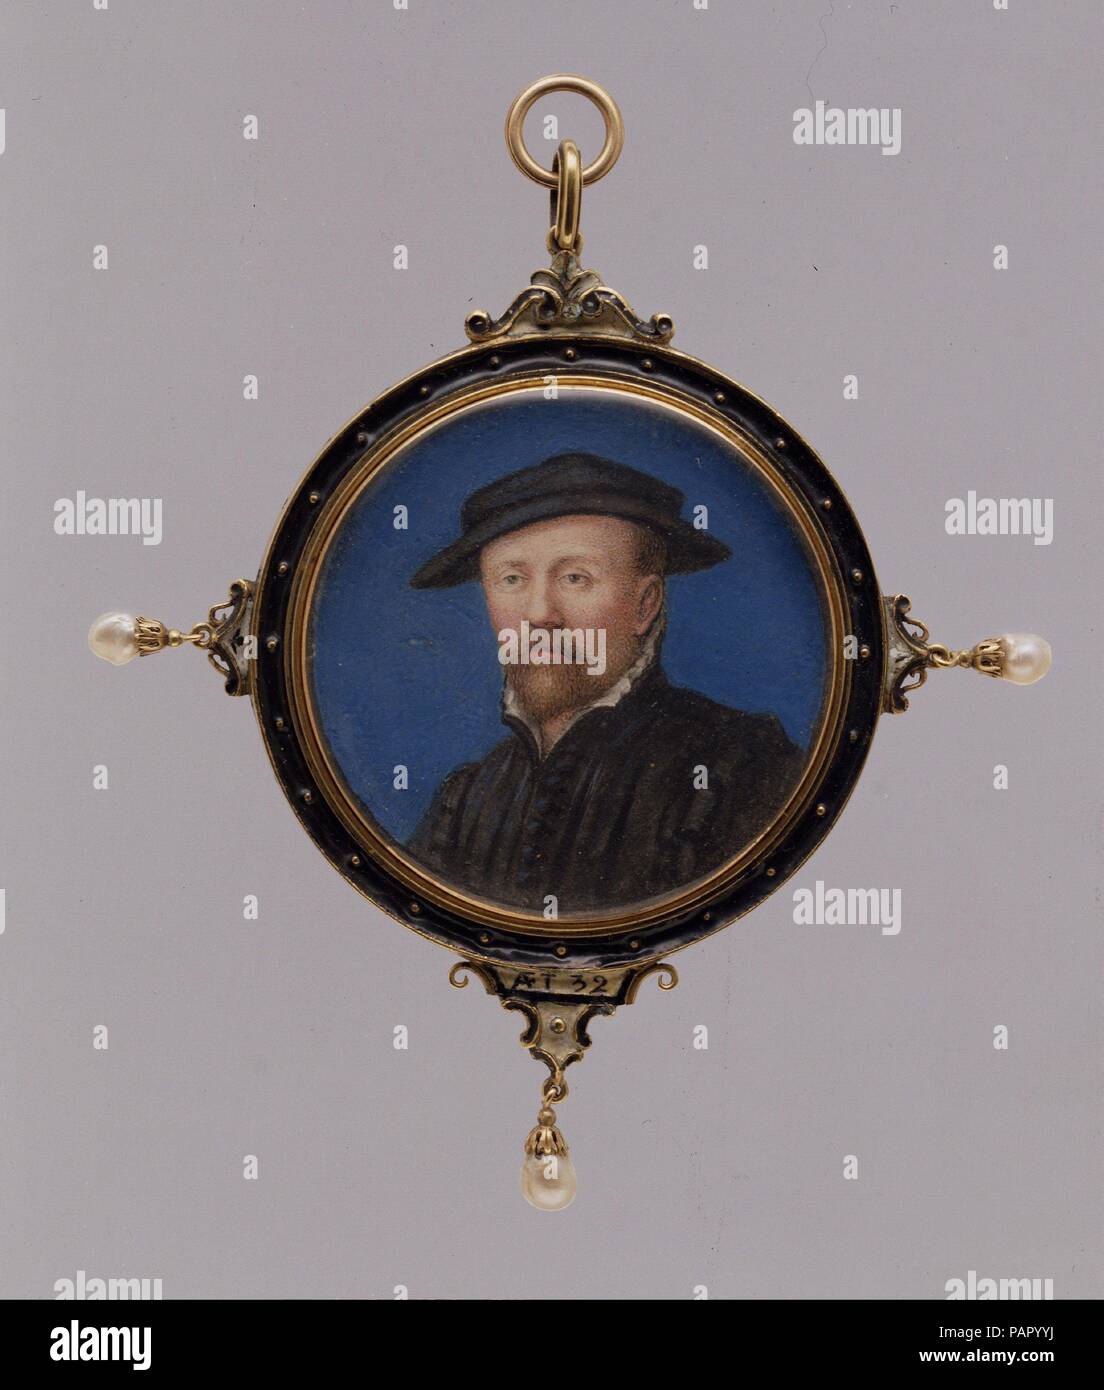 Portrait of a Man, Said to Be Arnold Franz. Artist: Imitator of Hans Holbein the Younger (17th or early 18th century). Dimensions: Diameter 2 1/8 in. (53 mm). Museum: Metropolitan Museum of Art, New York, USA. Stock Photo